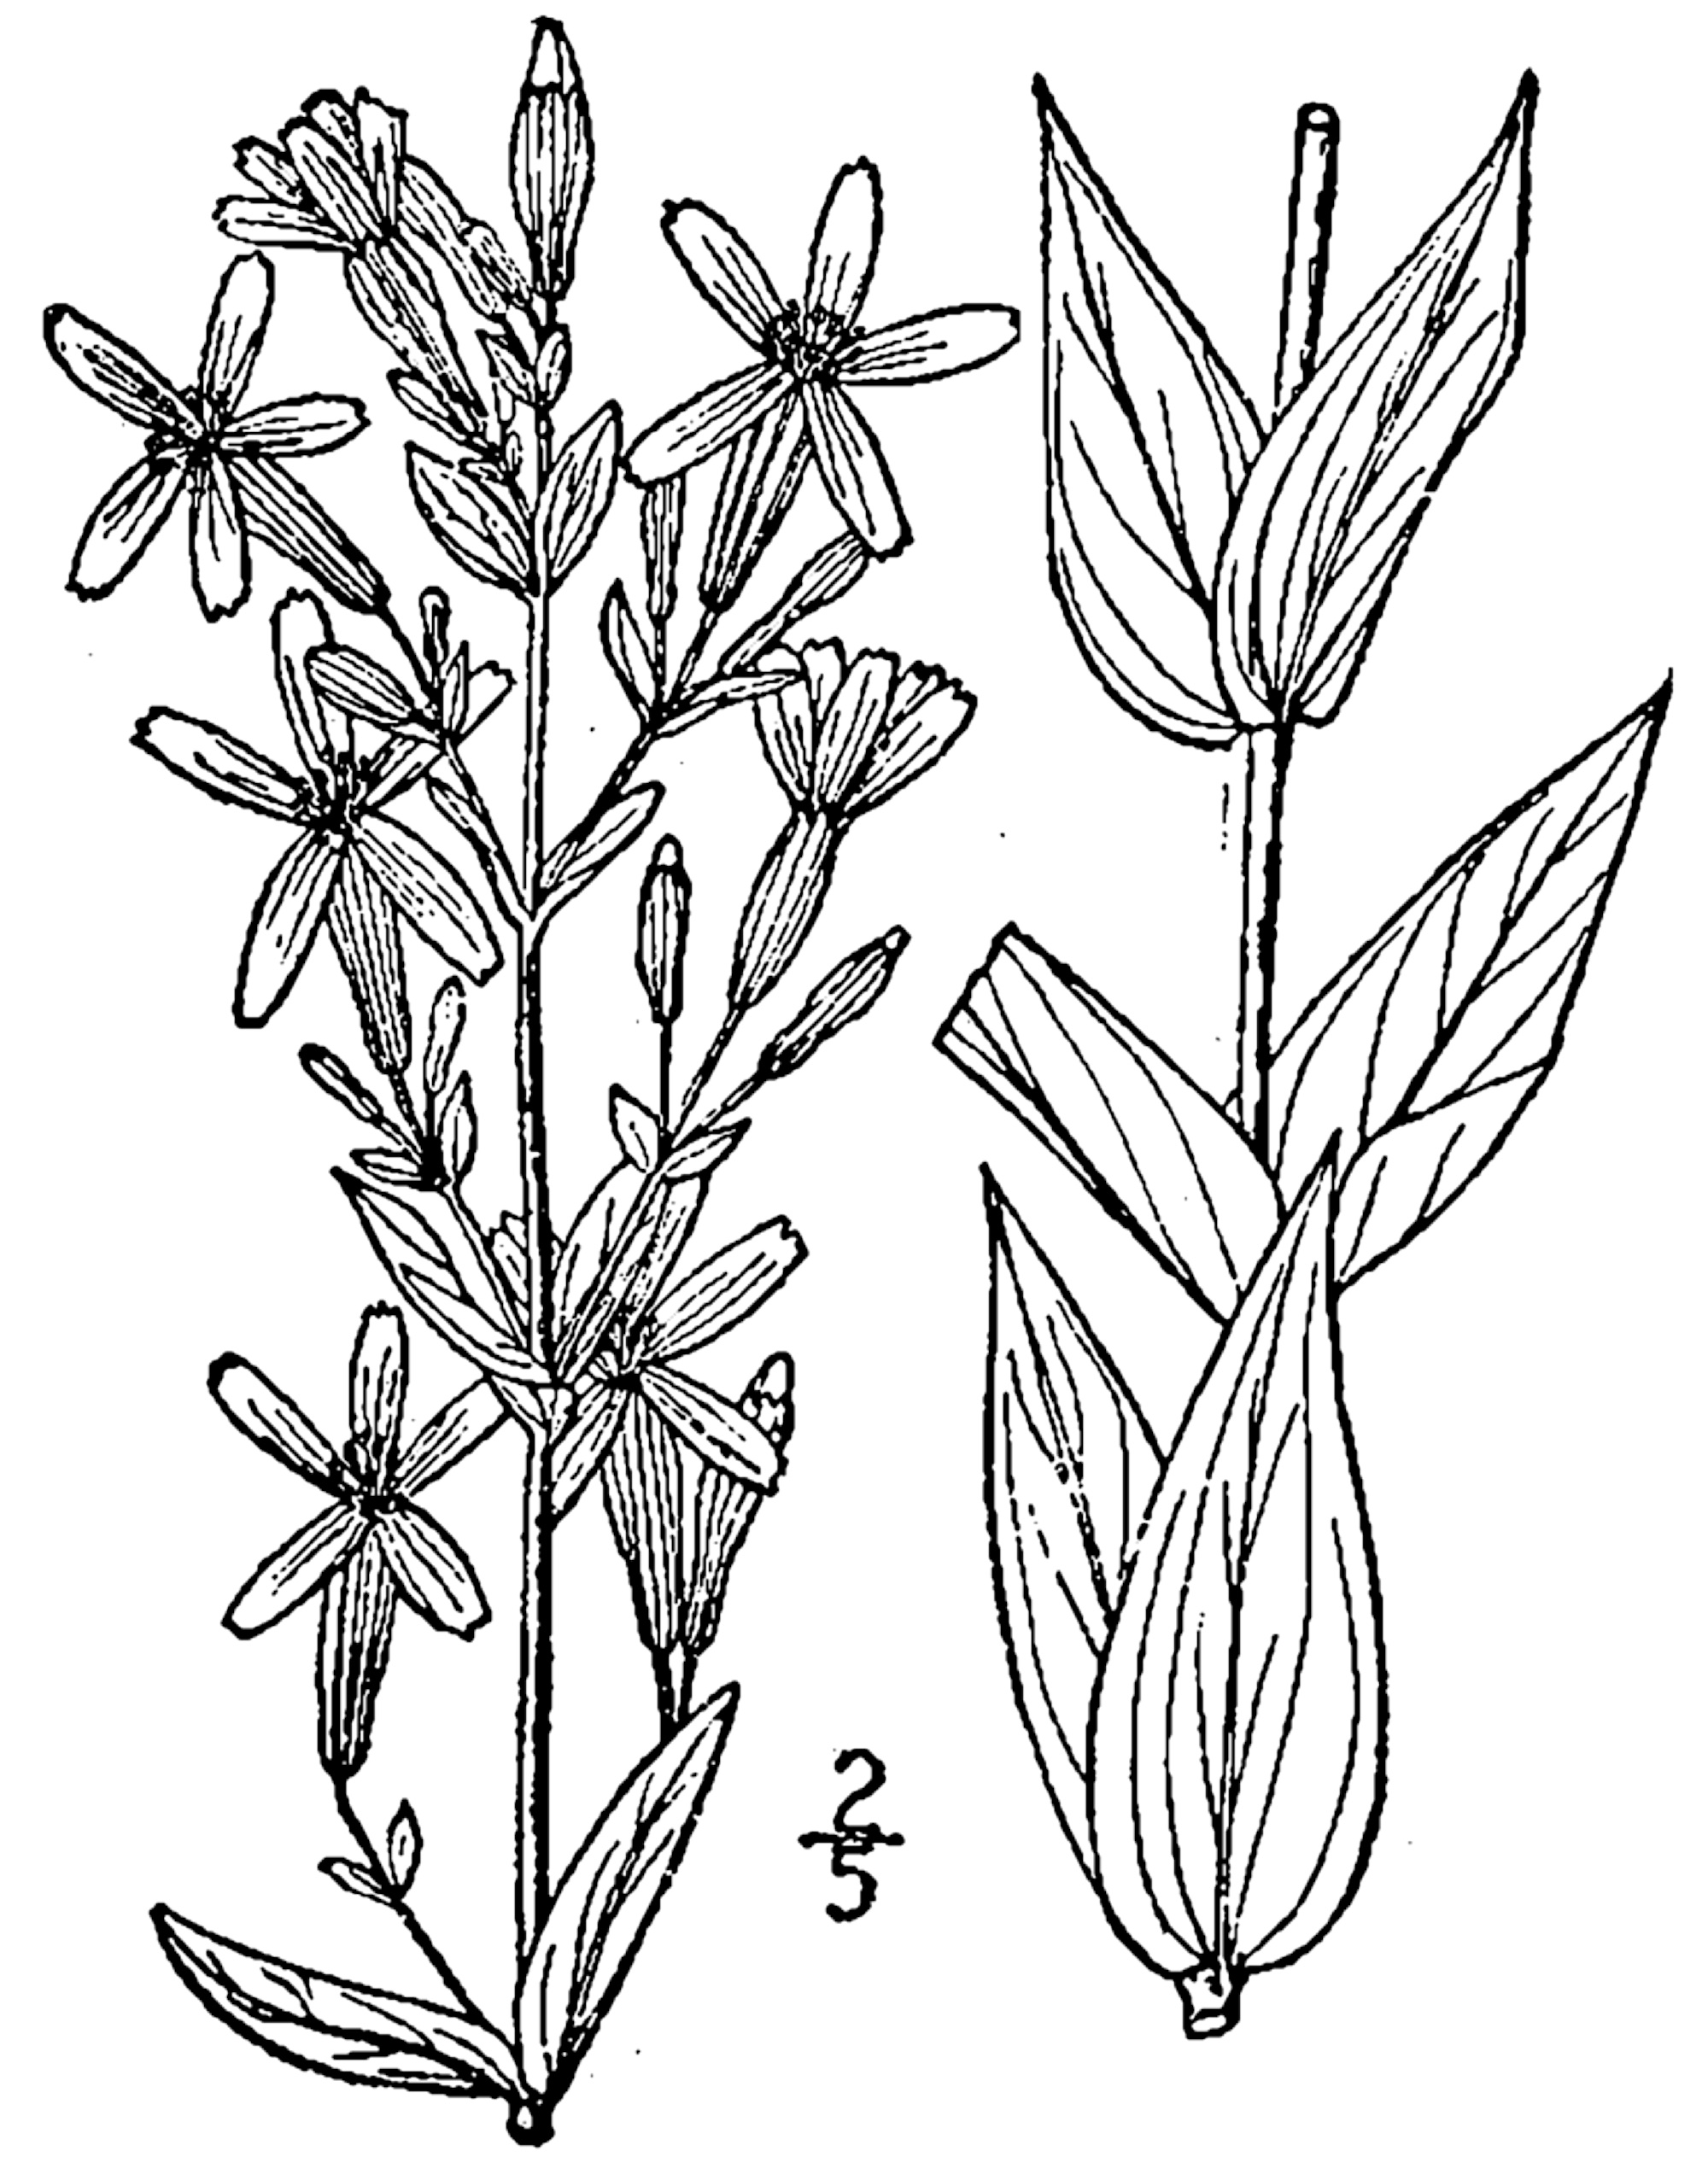 1913 Royal Catchfly line drawing.